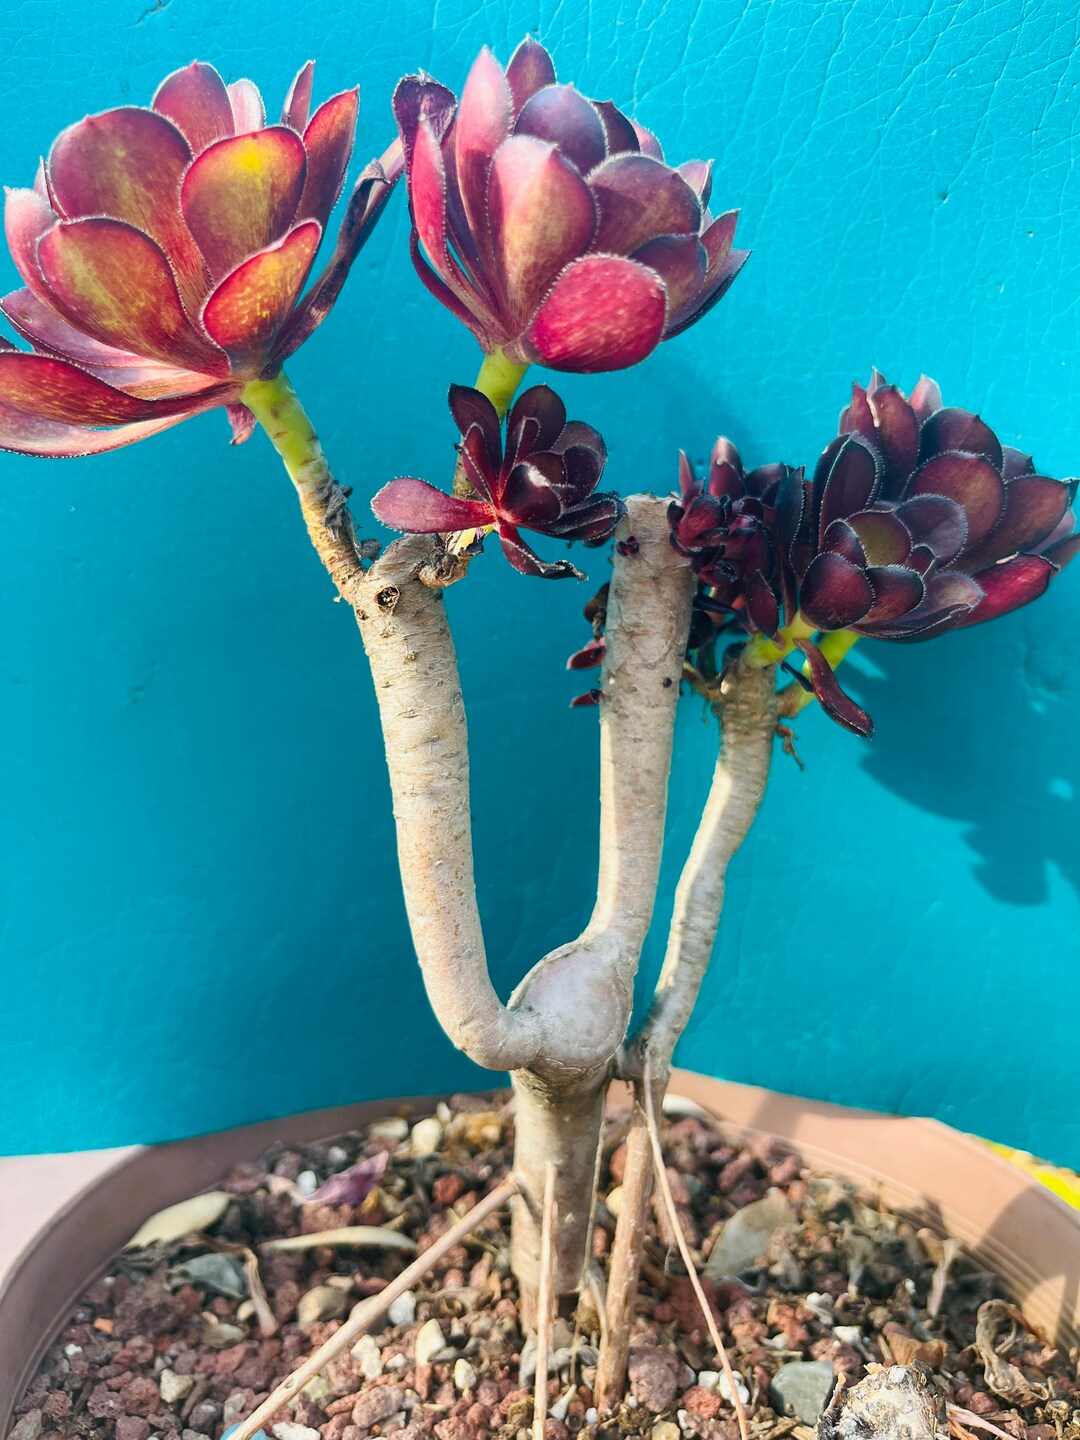 Rare Black Aeonium Bonsai Old Trunk Live Rooted Get 2 Free - Etsy